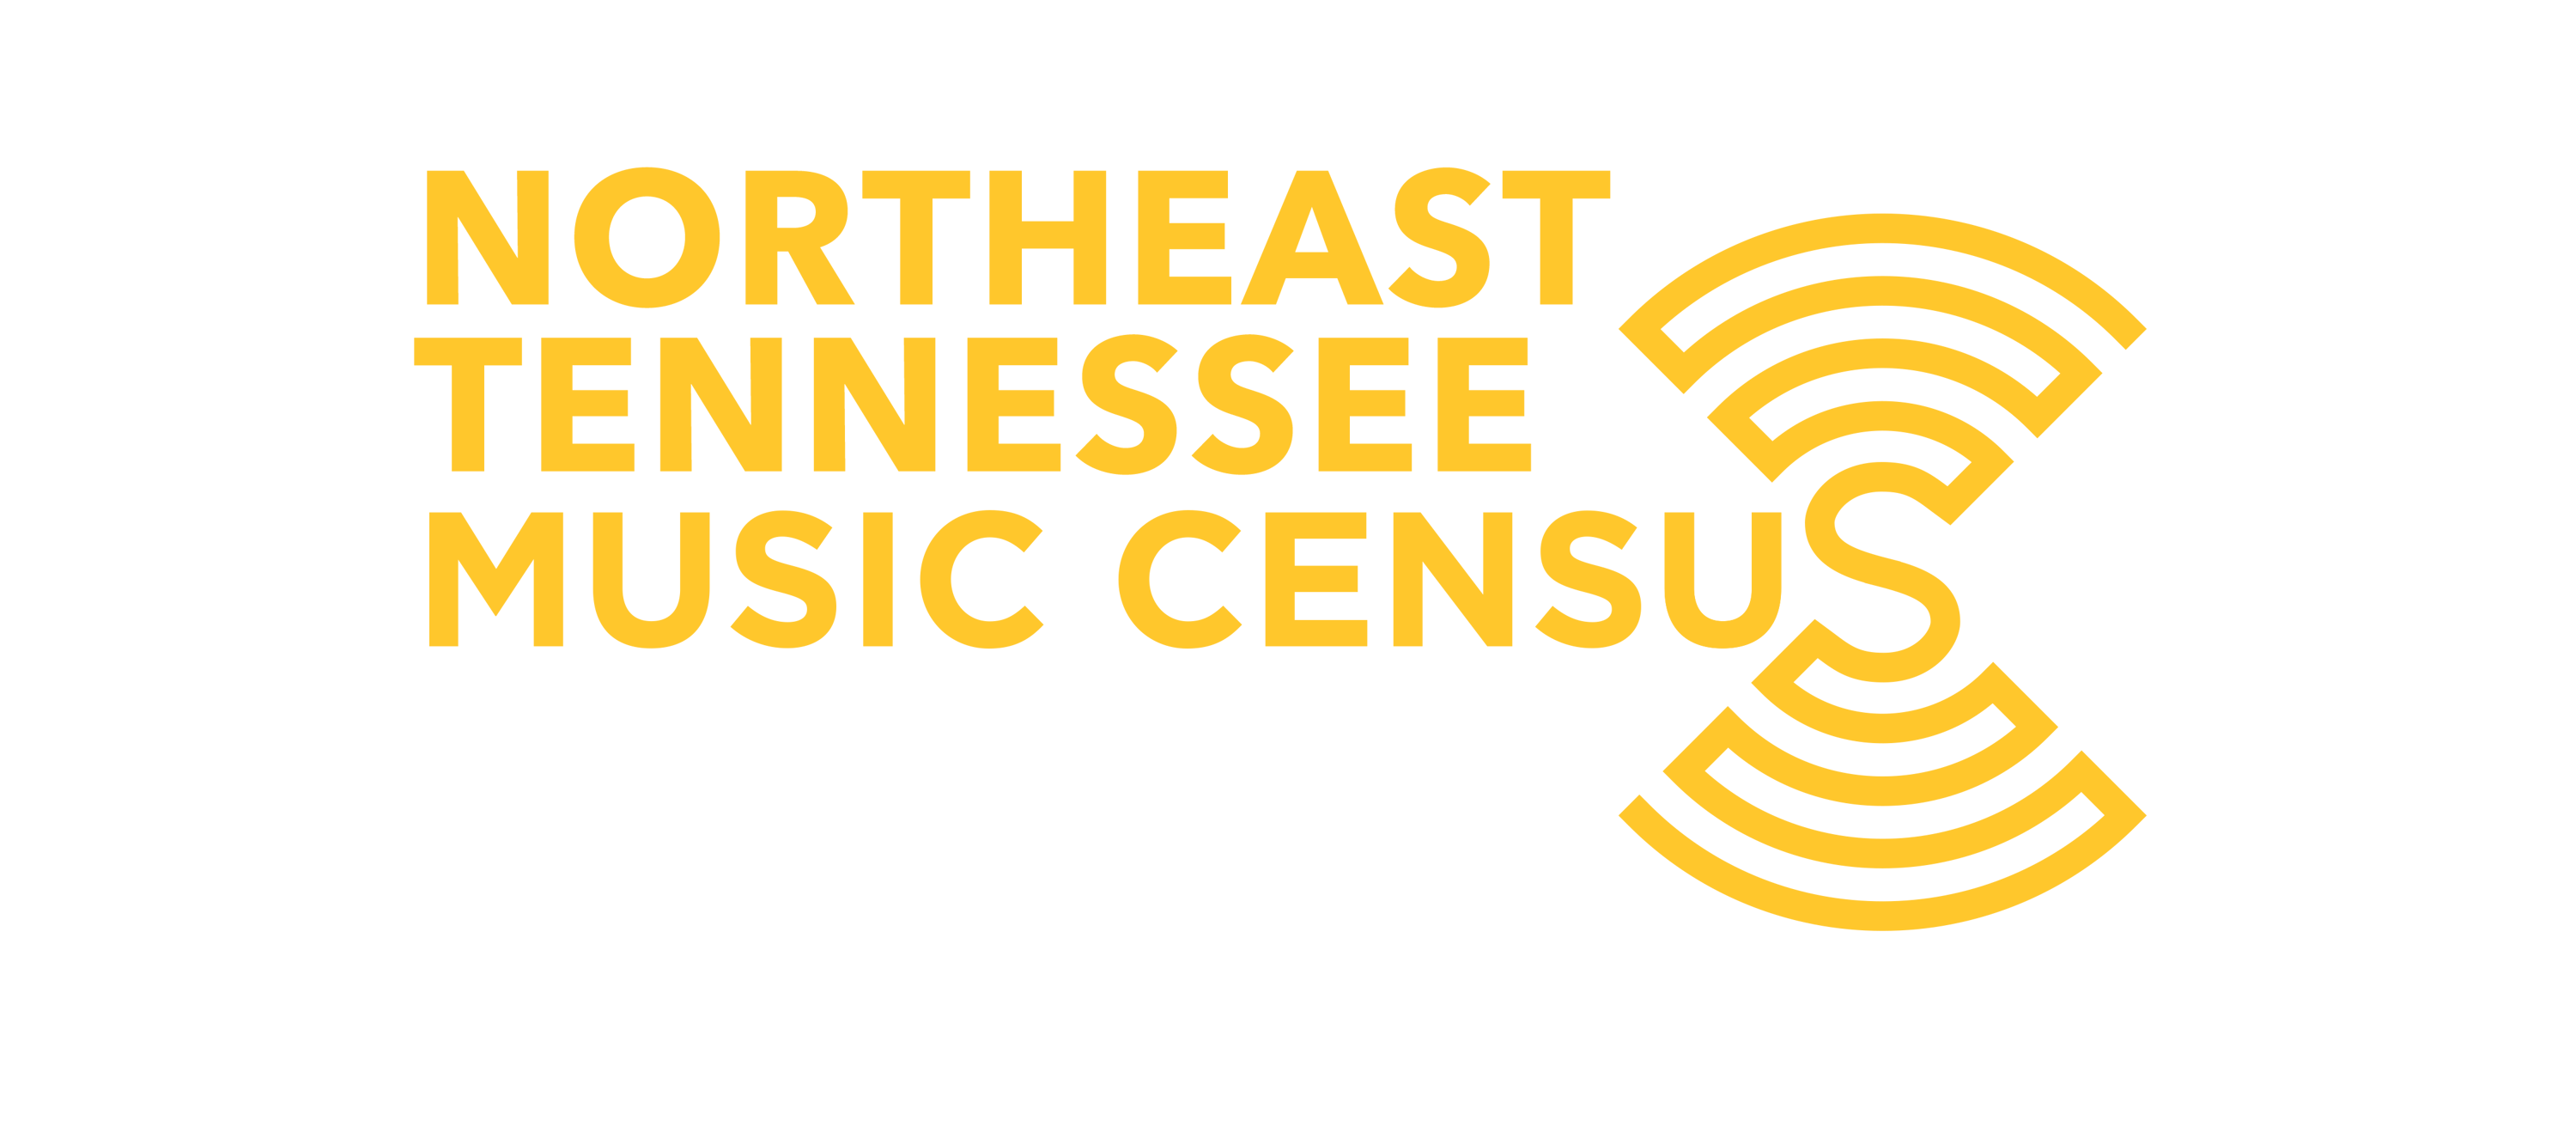 Northeast Tennessee Music Census Logo Gold-1